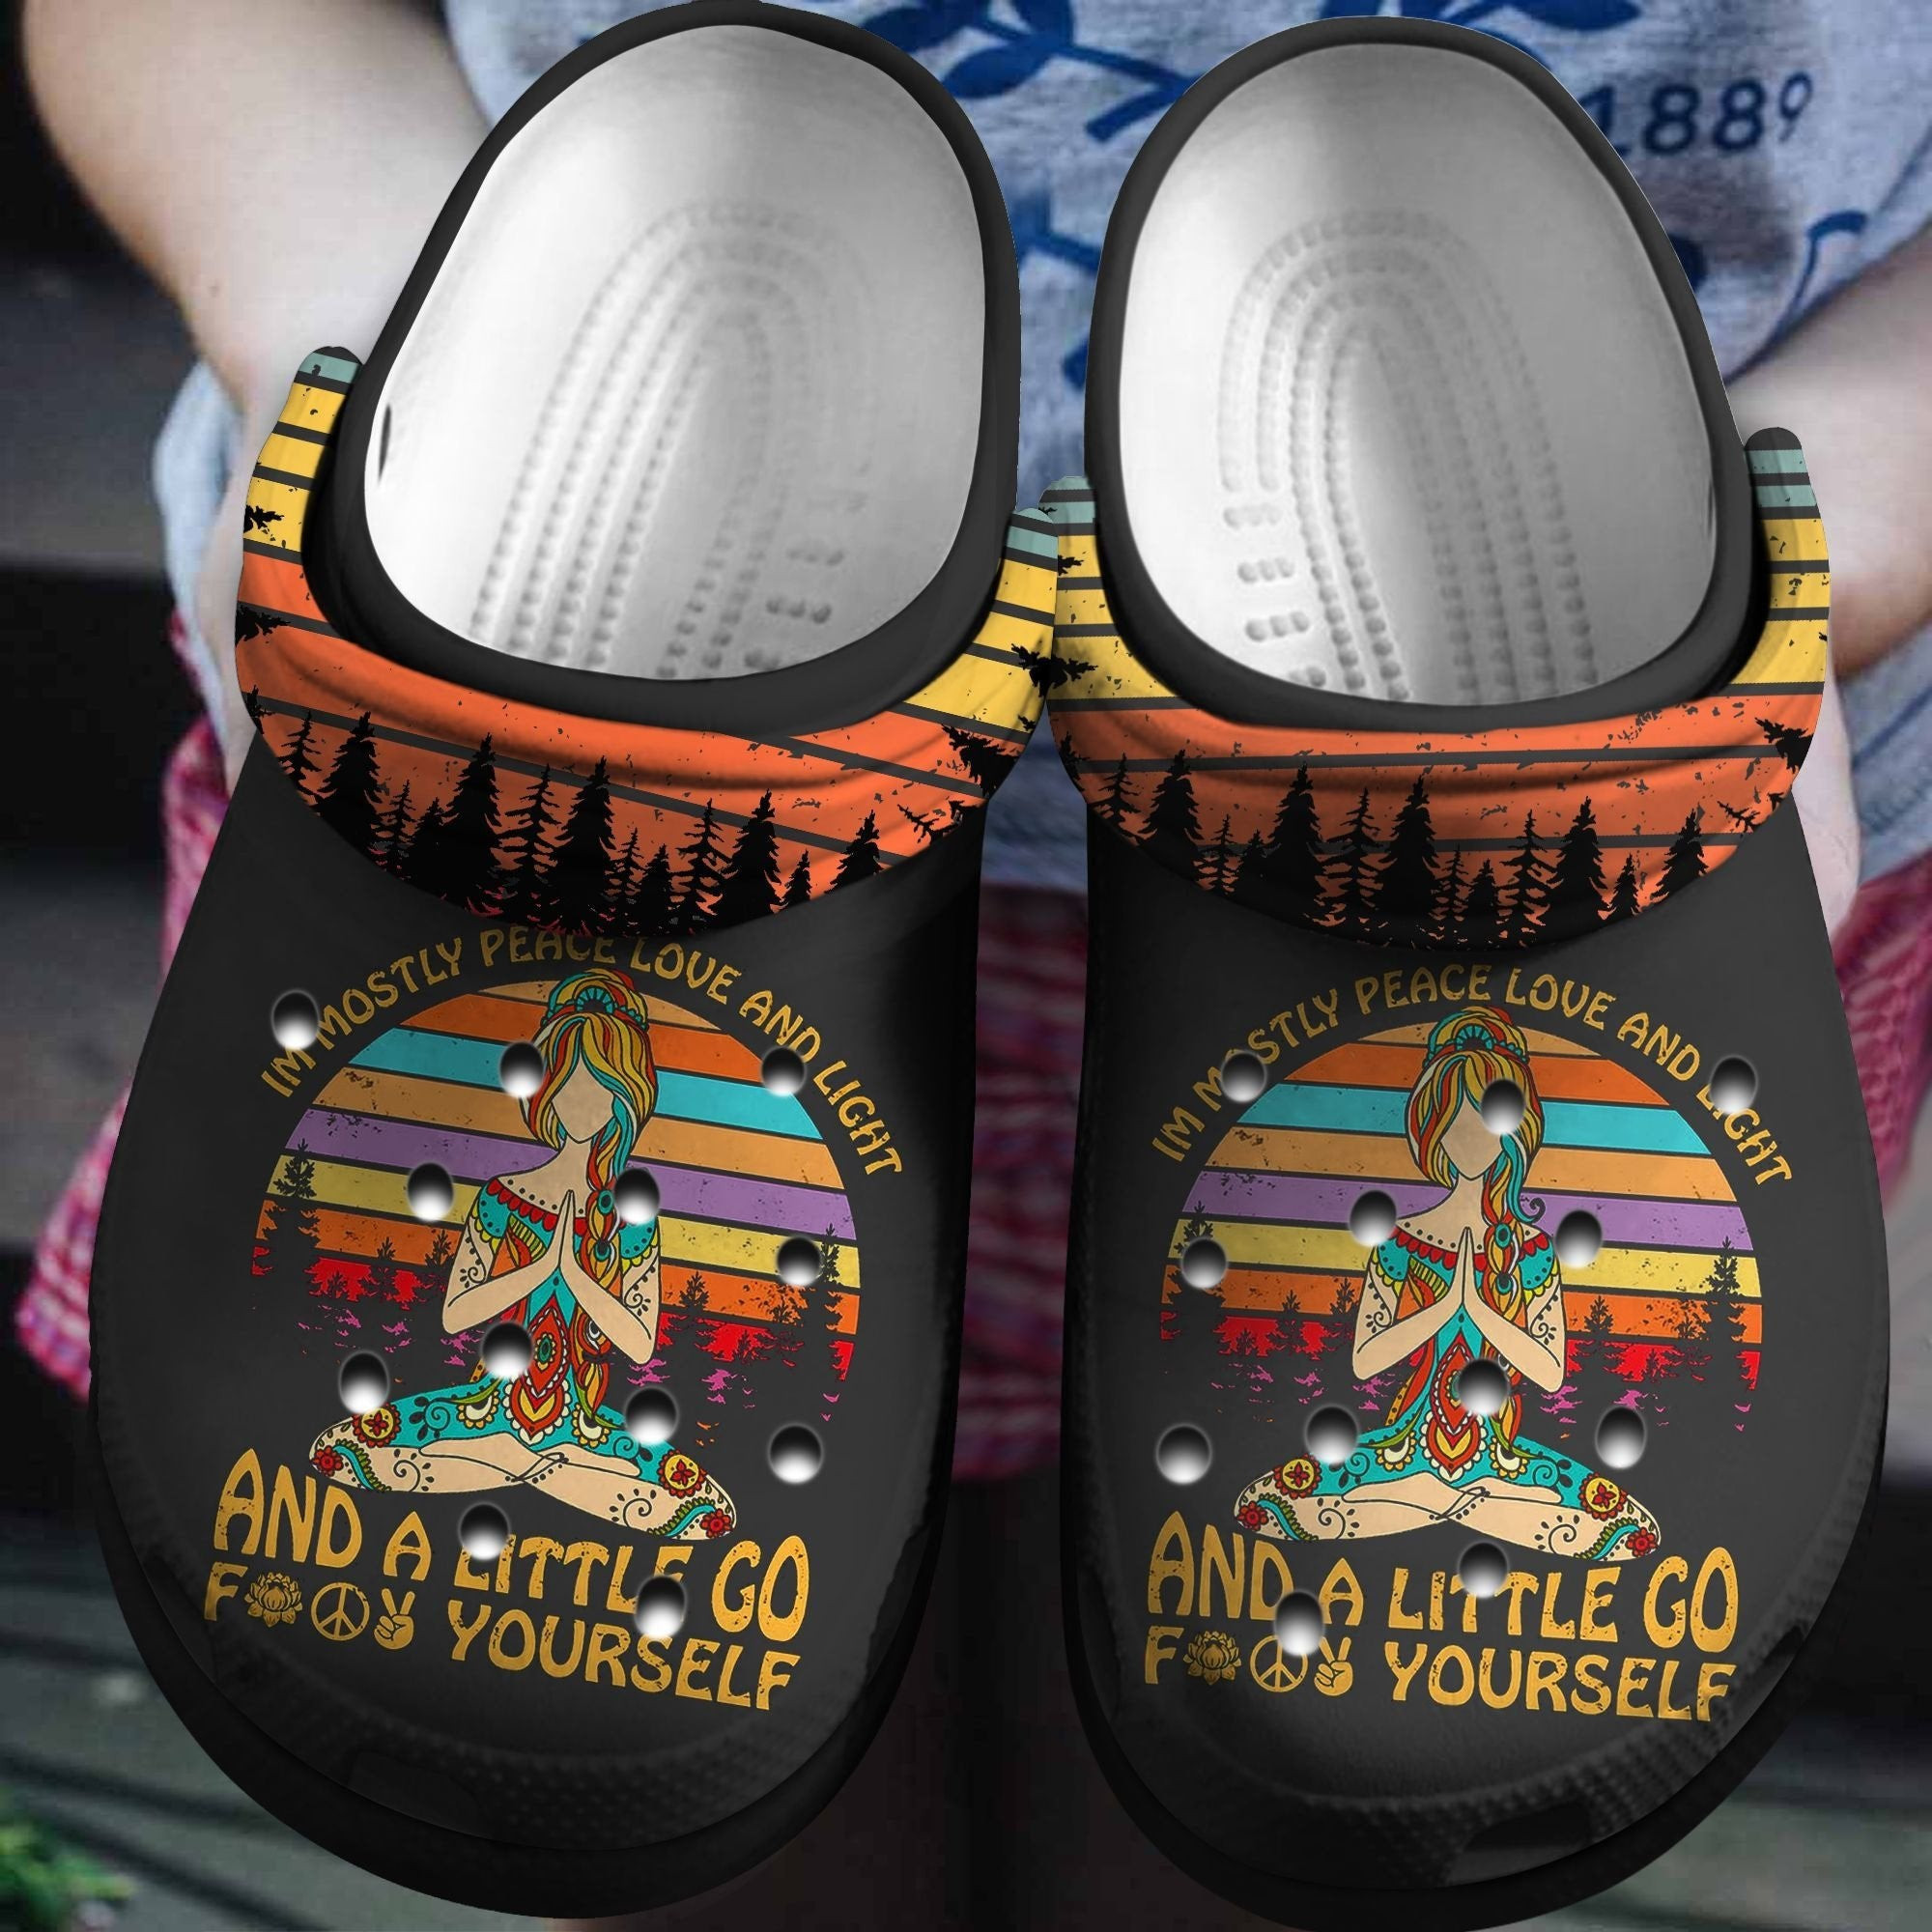 Im Mostly Peace Love And Light Crocs Shoes - Yoga Girl clogs Gift For Birthday